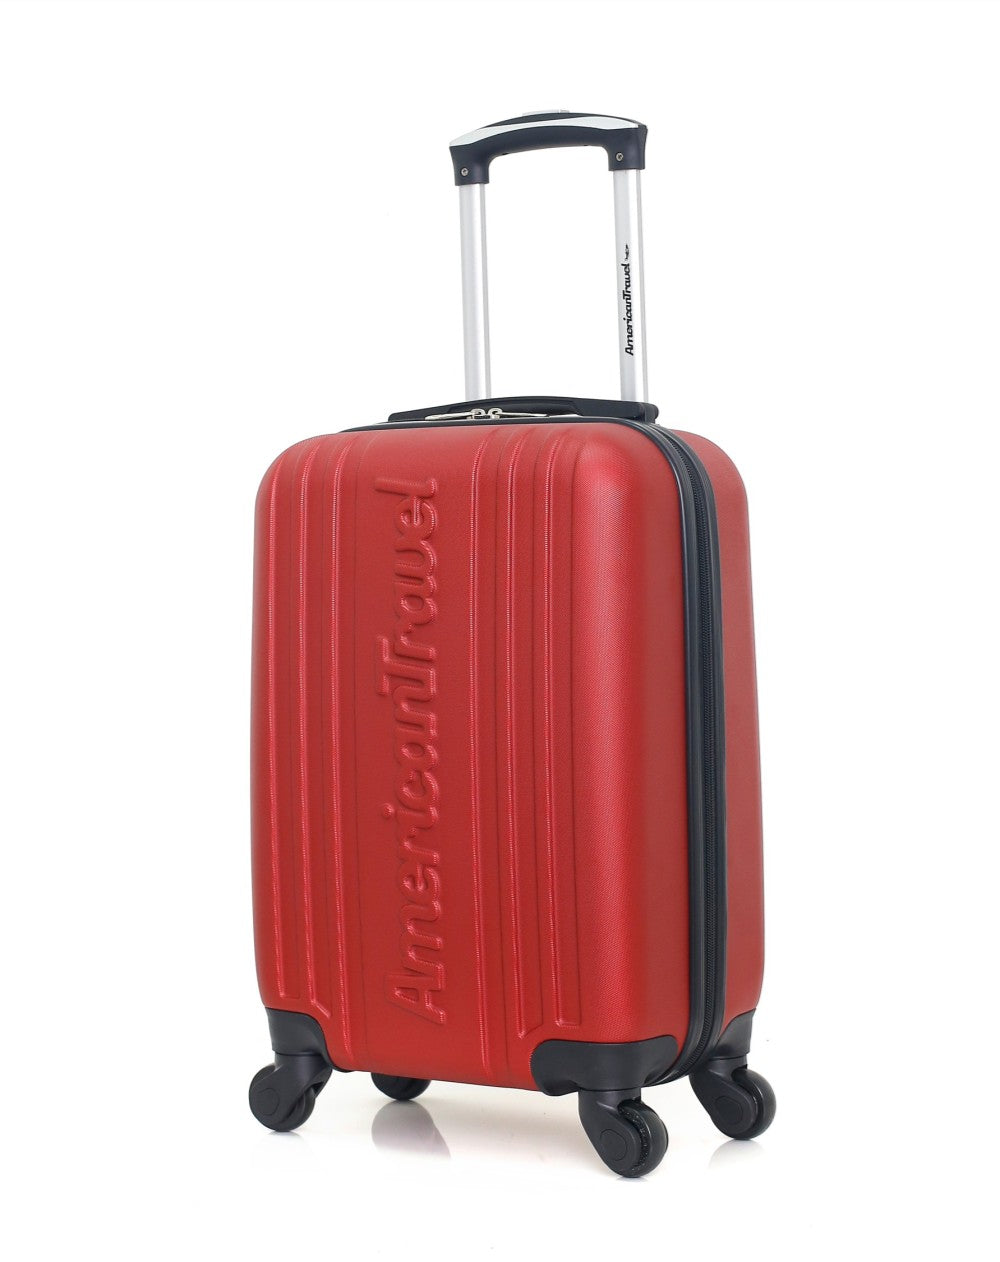 Valise Cabine ABS SPRINGFIELD-E 4 Roues 50 cm